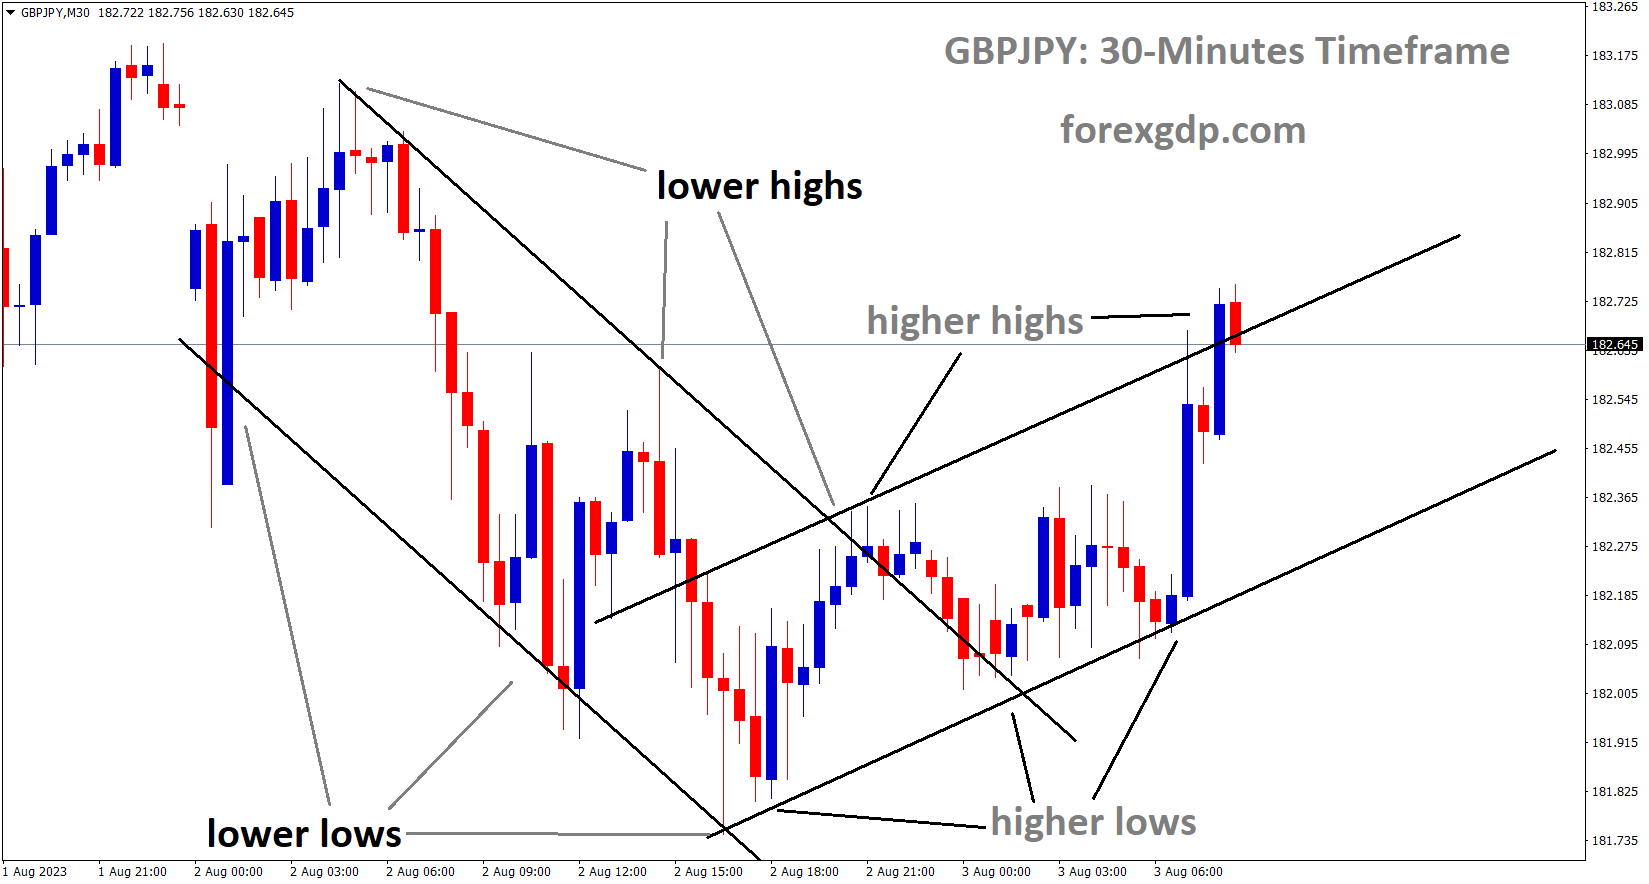 GBPJPY has broken the Descending channel in upside and the market has reached the higher high area of the Ascending channel.